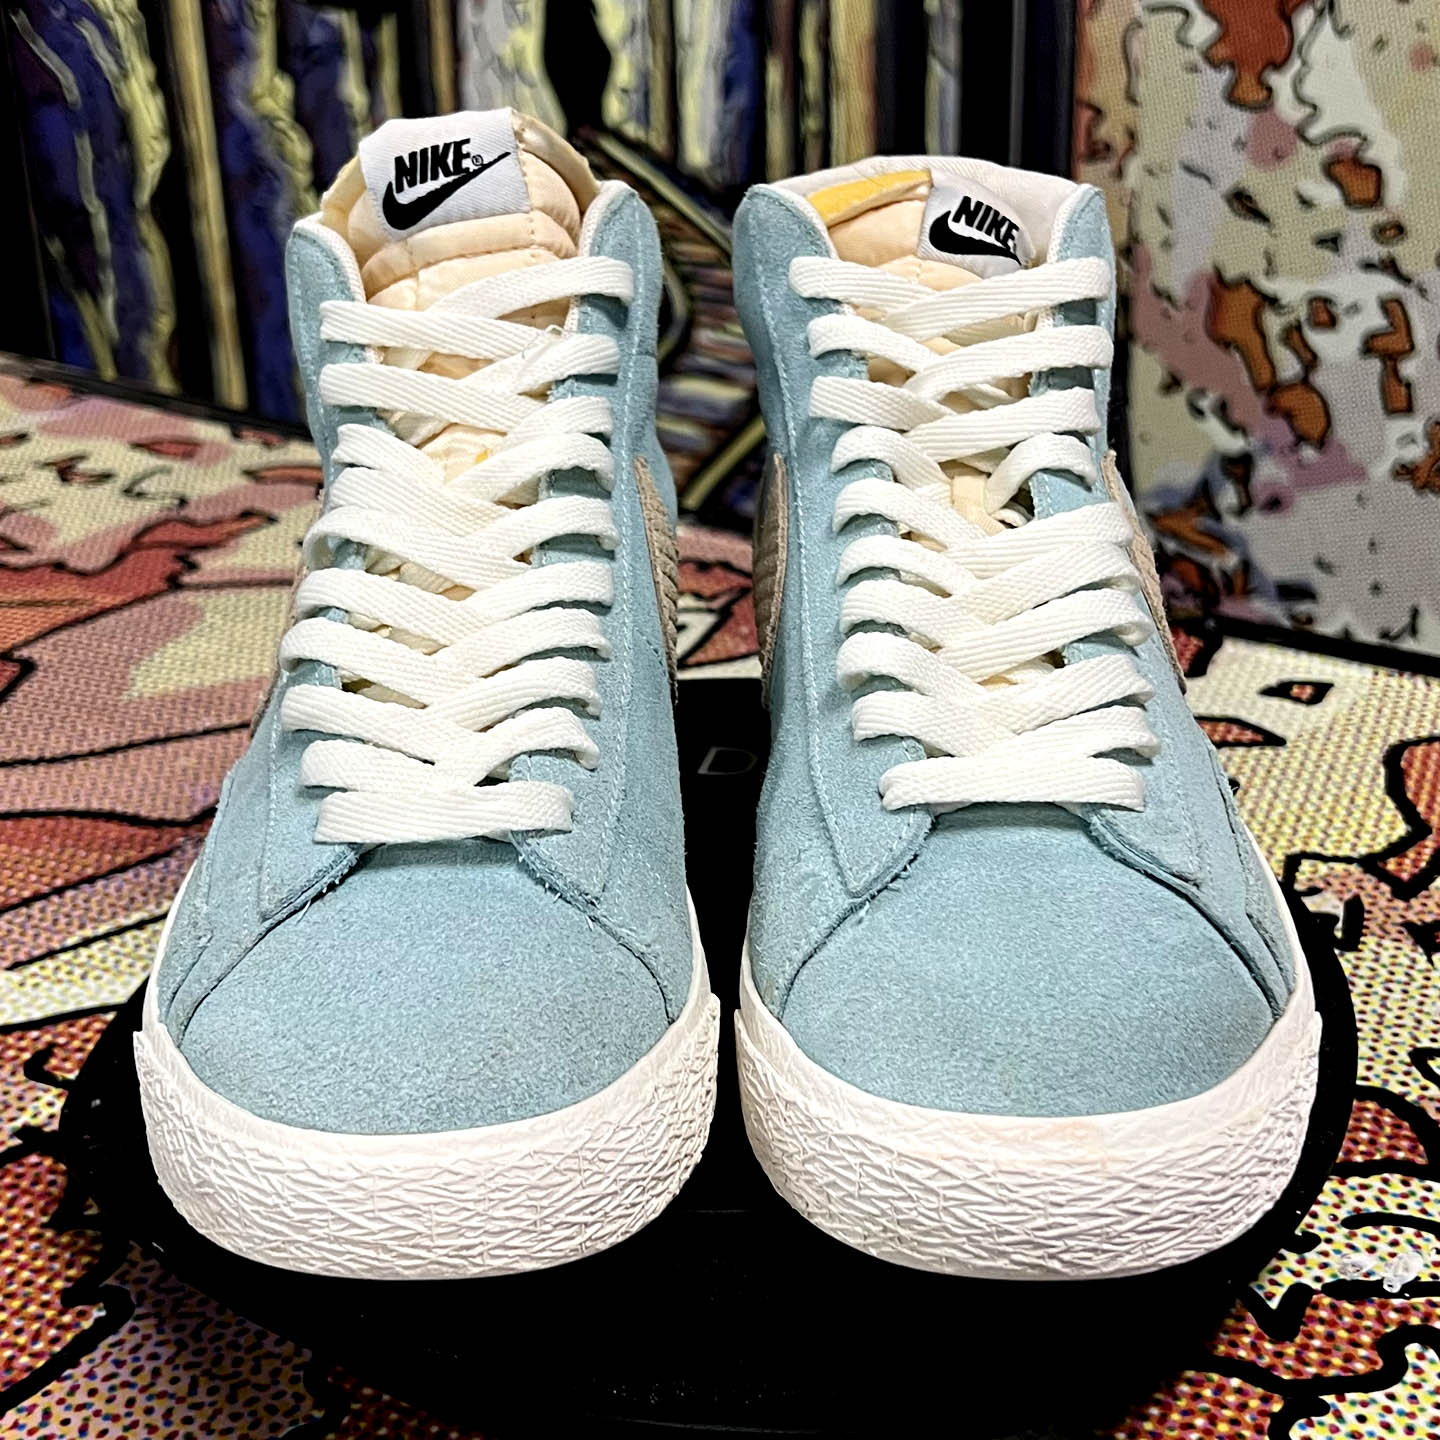 Nike Blazer Mid Premium Vintage QS Suede Ice Cream cleaned by Dope Street Shoes in Dallas, Texas.